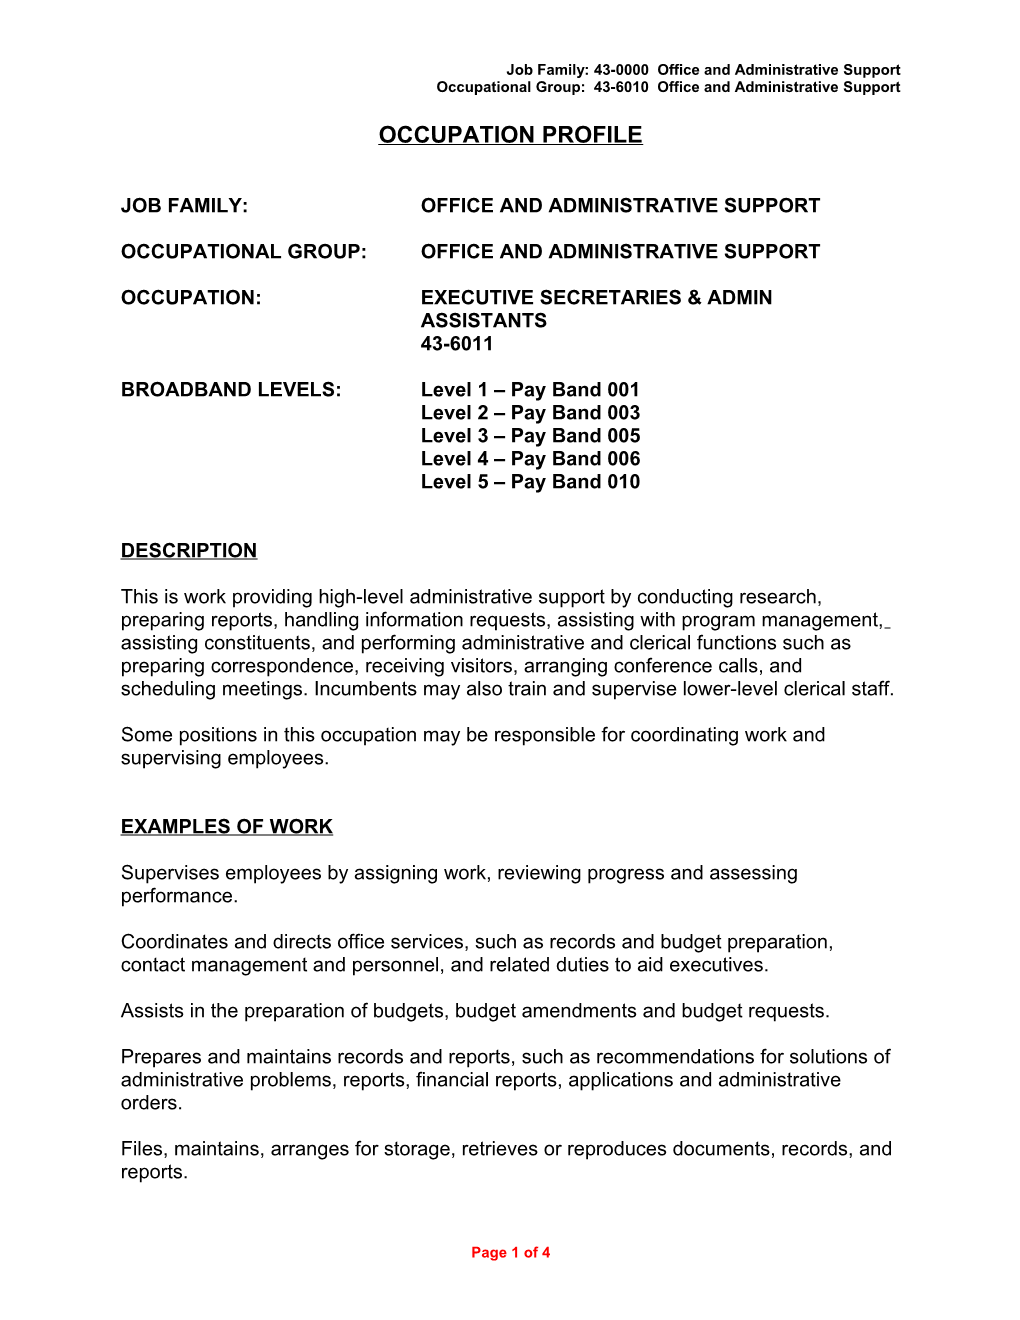 Job Family: 43-0000 Office and Administrative Support